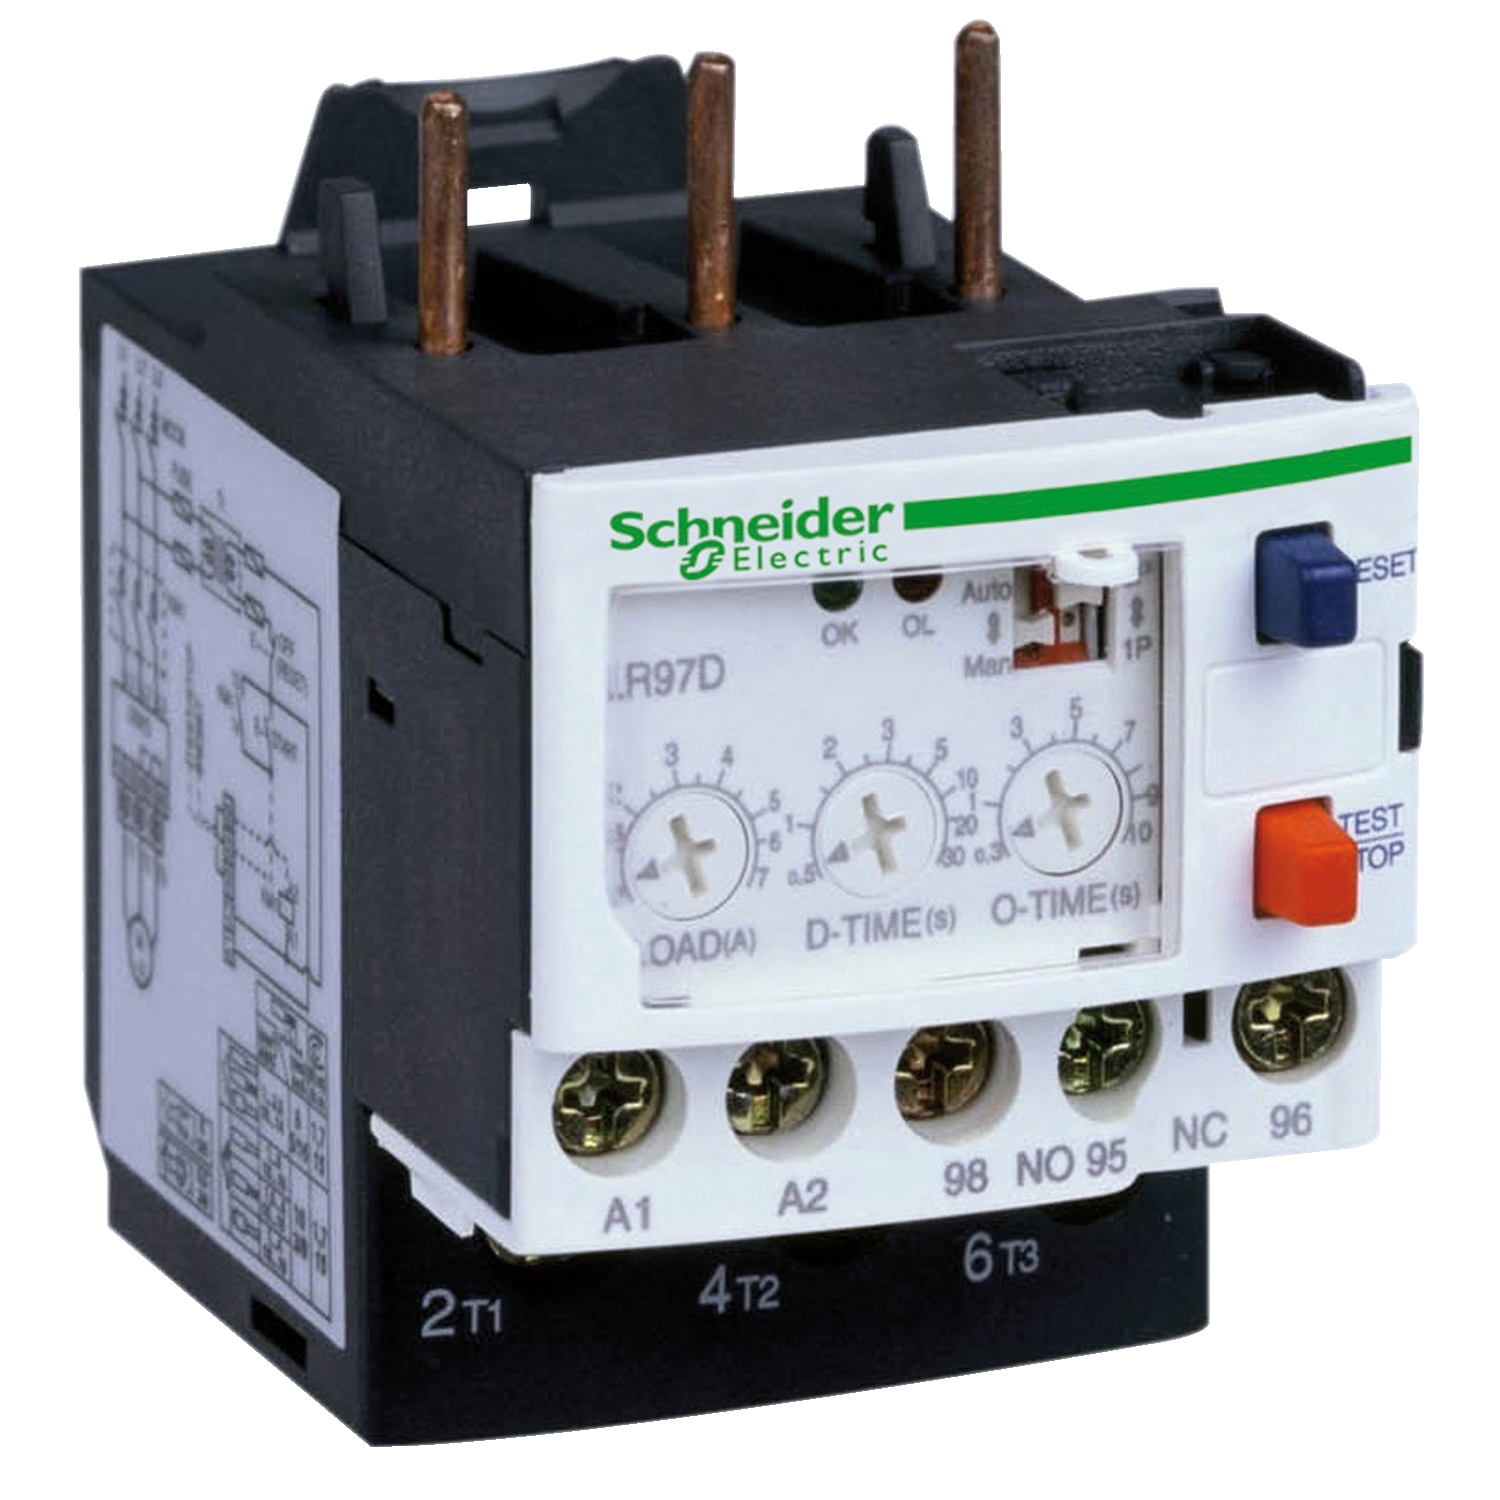 Electronic overcurrent relay, TeSys LR97D, 100 to 120VAC, 5 to 25A, 1C/O